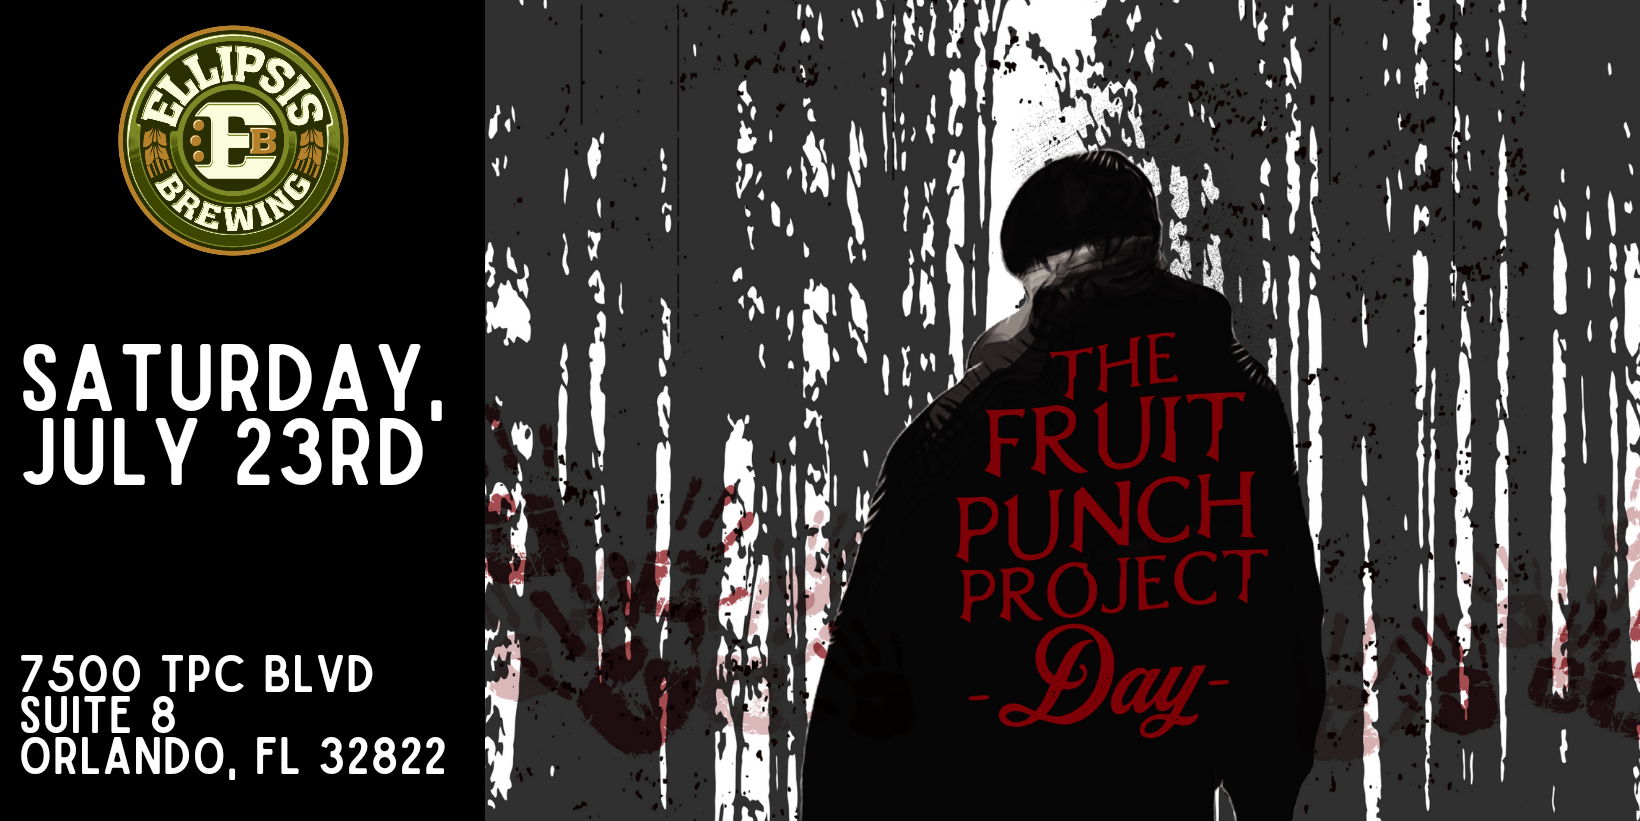 The Fruit Punch Project Day Beer Festival promotional image